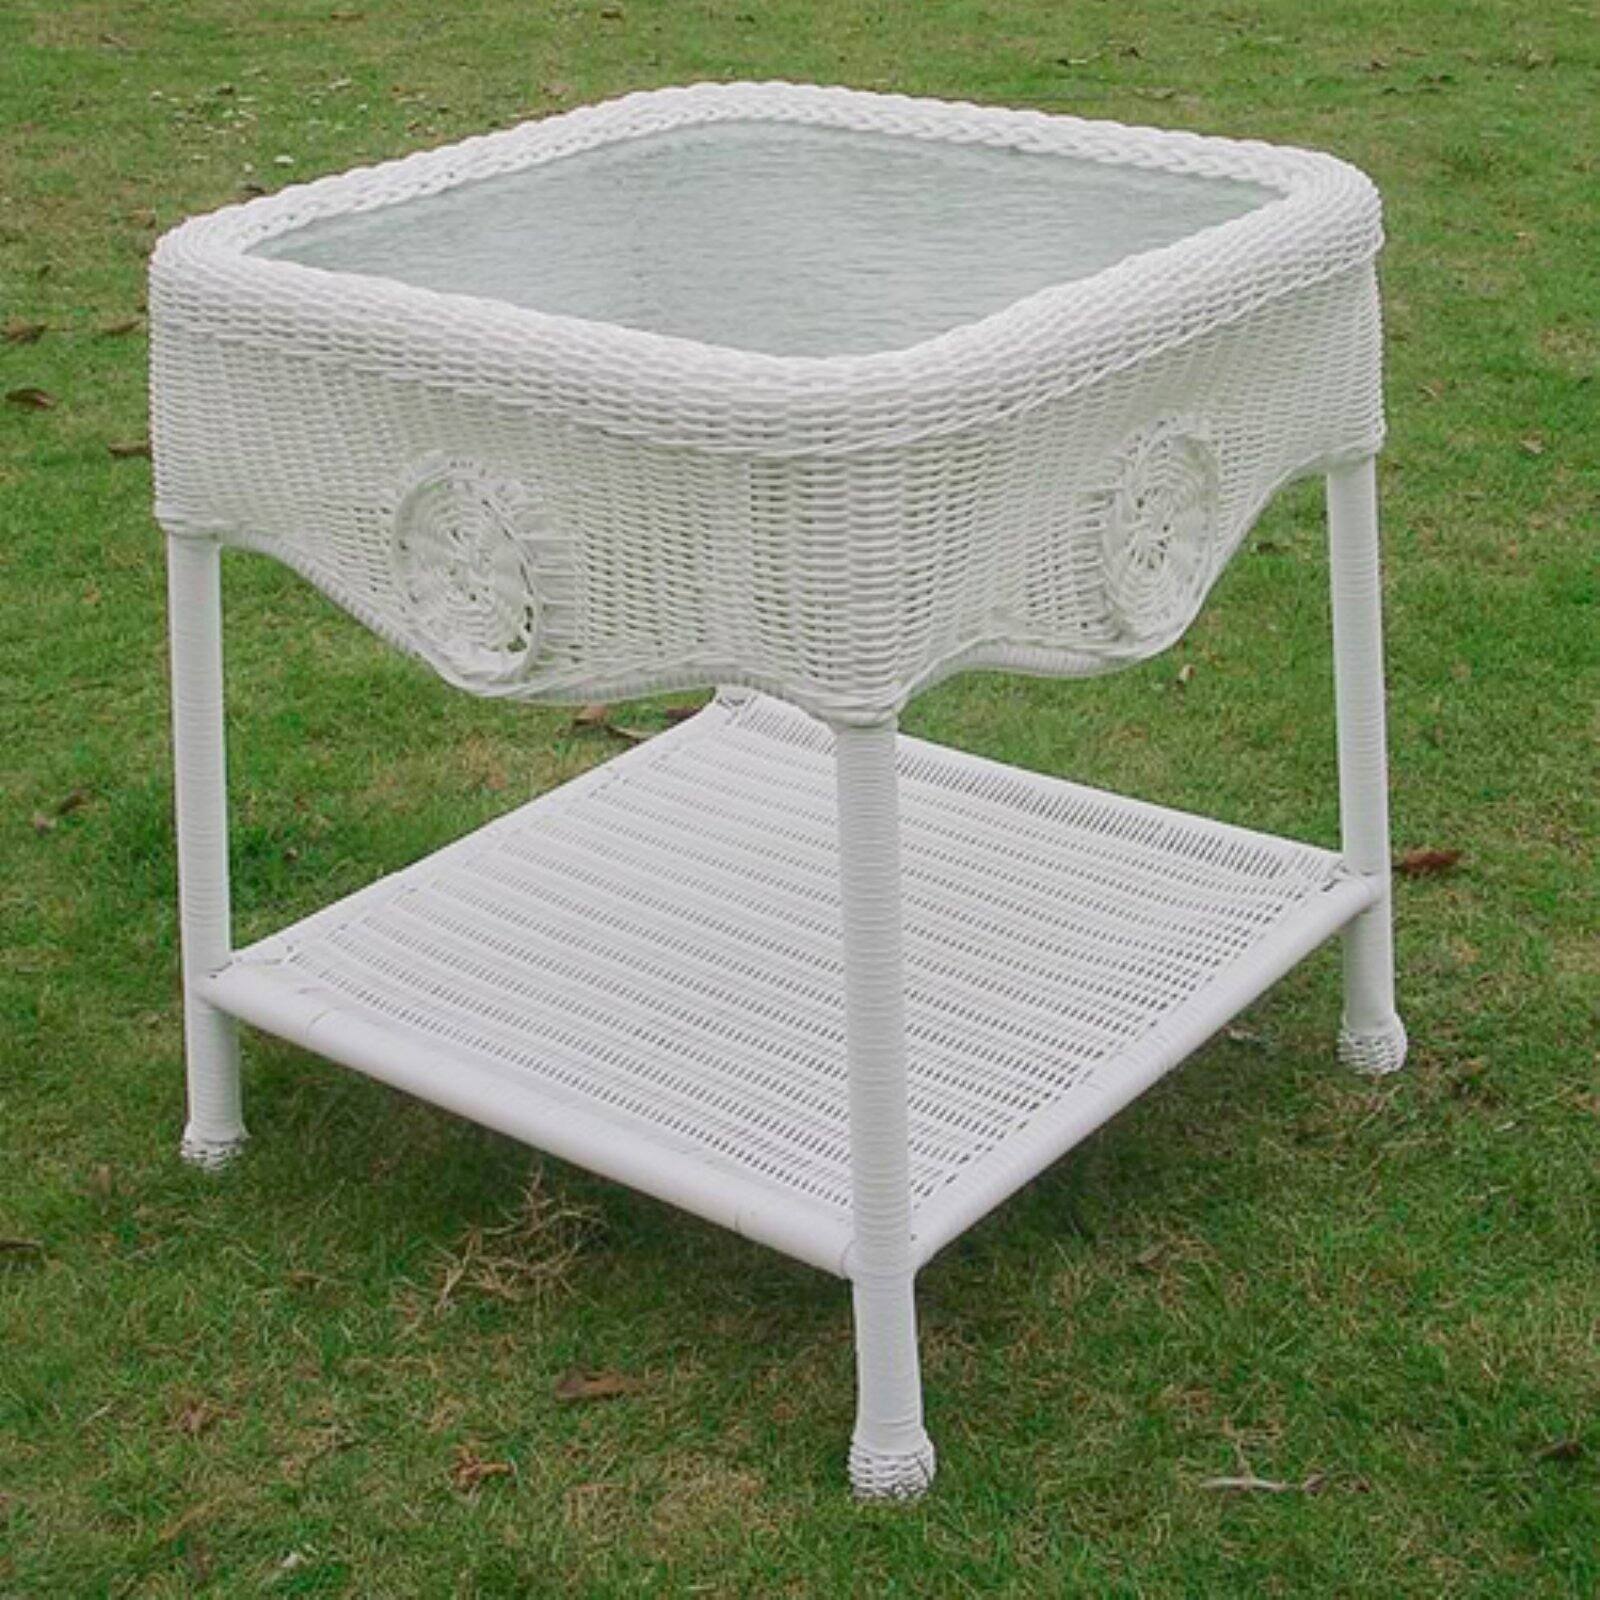 International Caravan Madison Wicker Resin Aluminum Patio Side Table with Glass - image 5 of 7